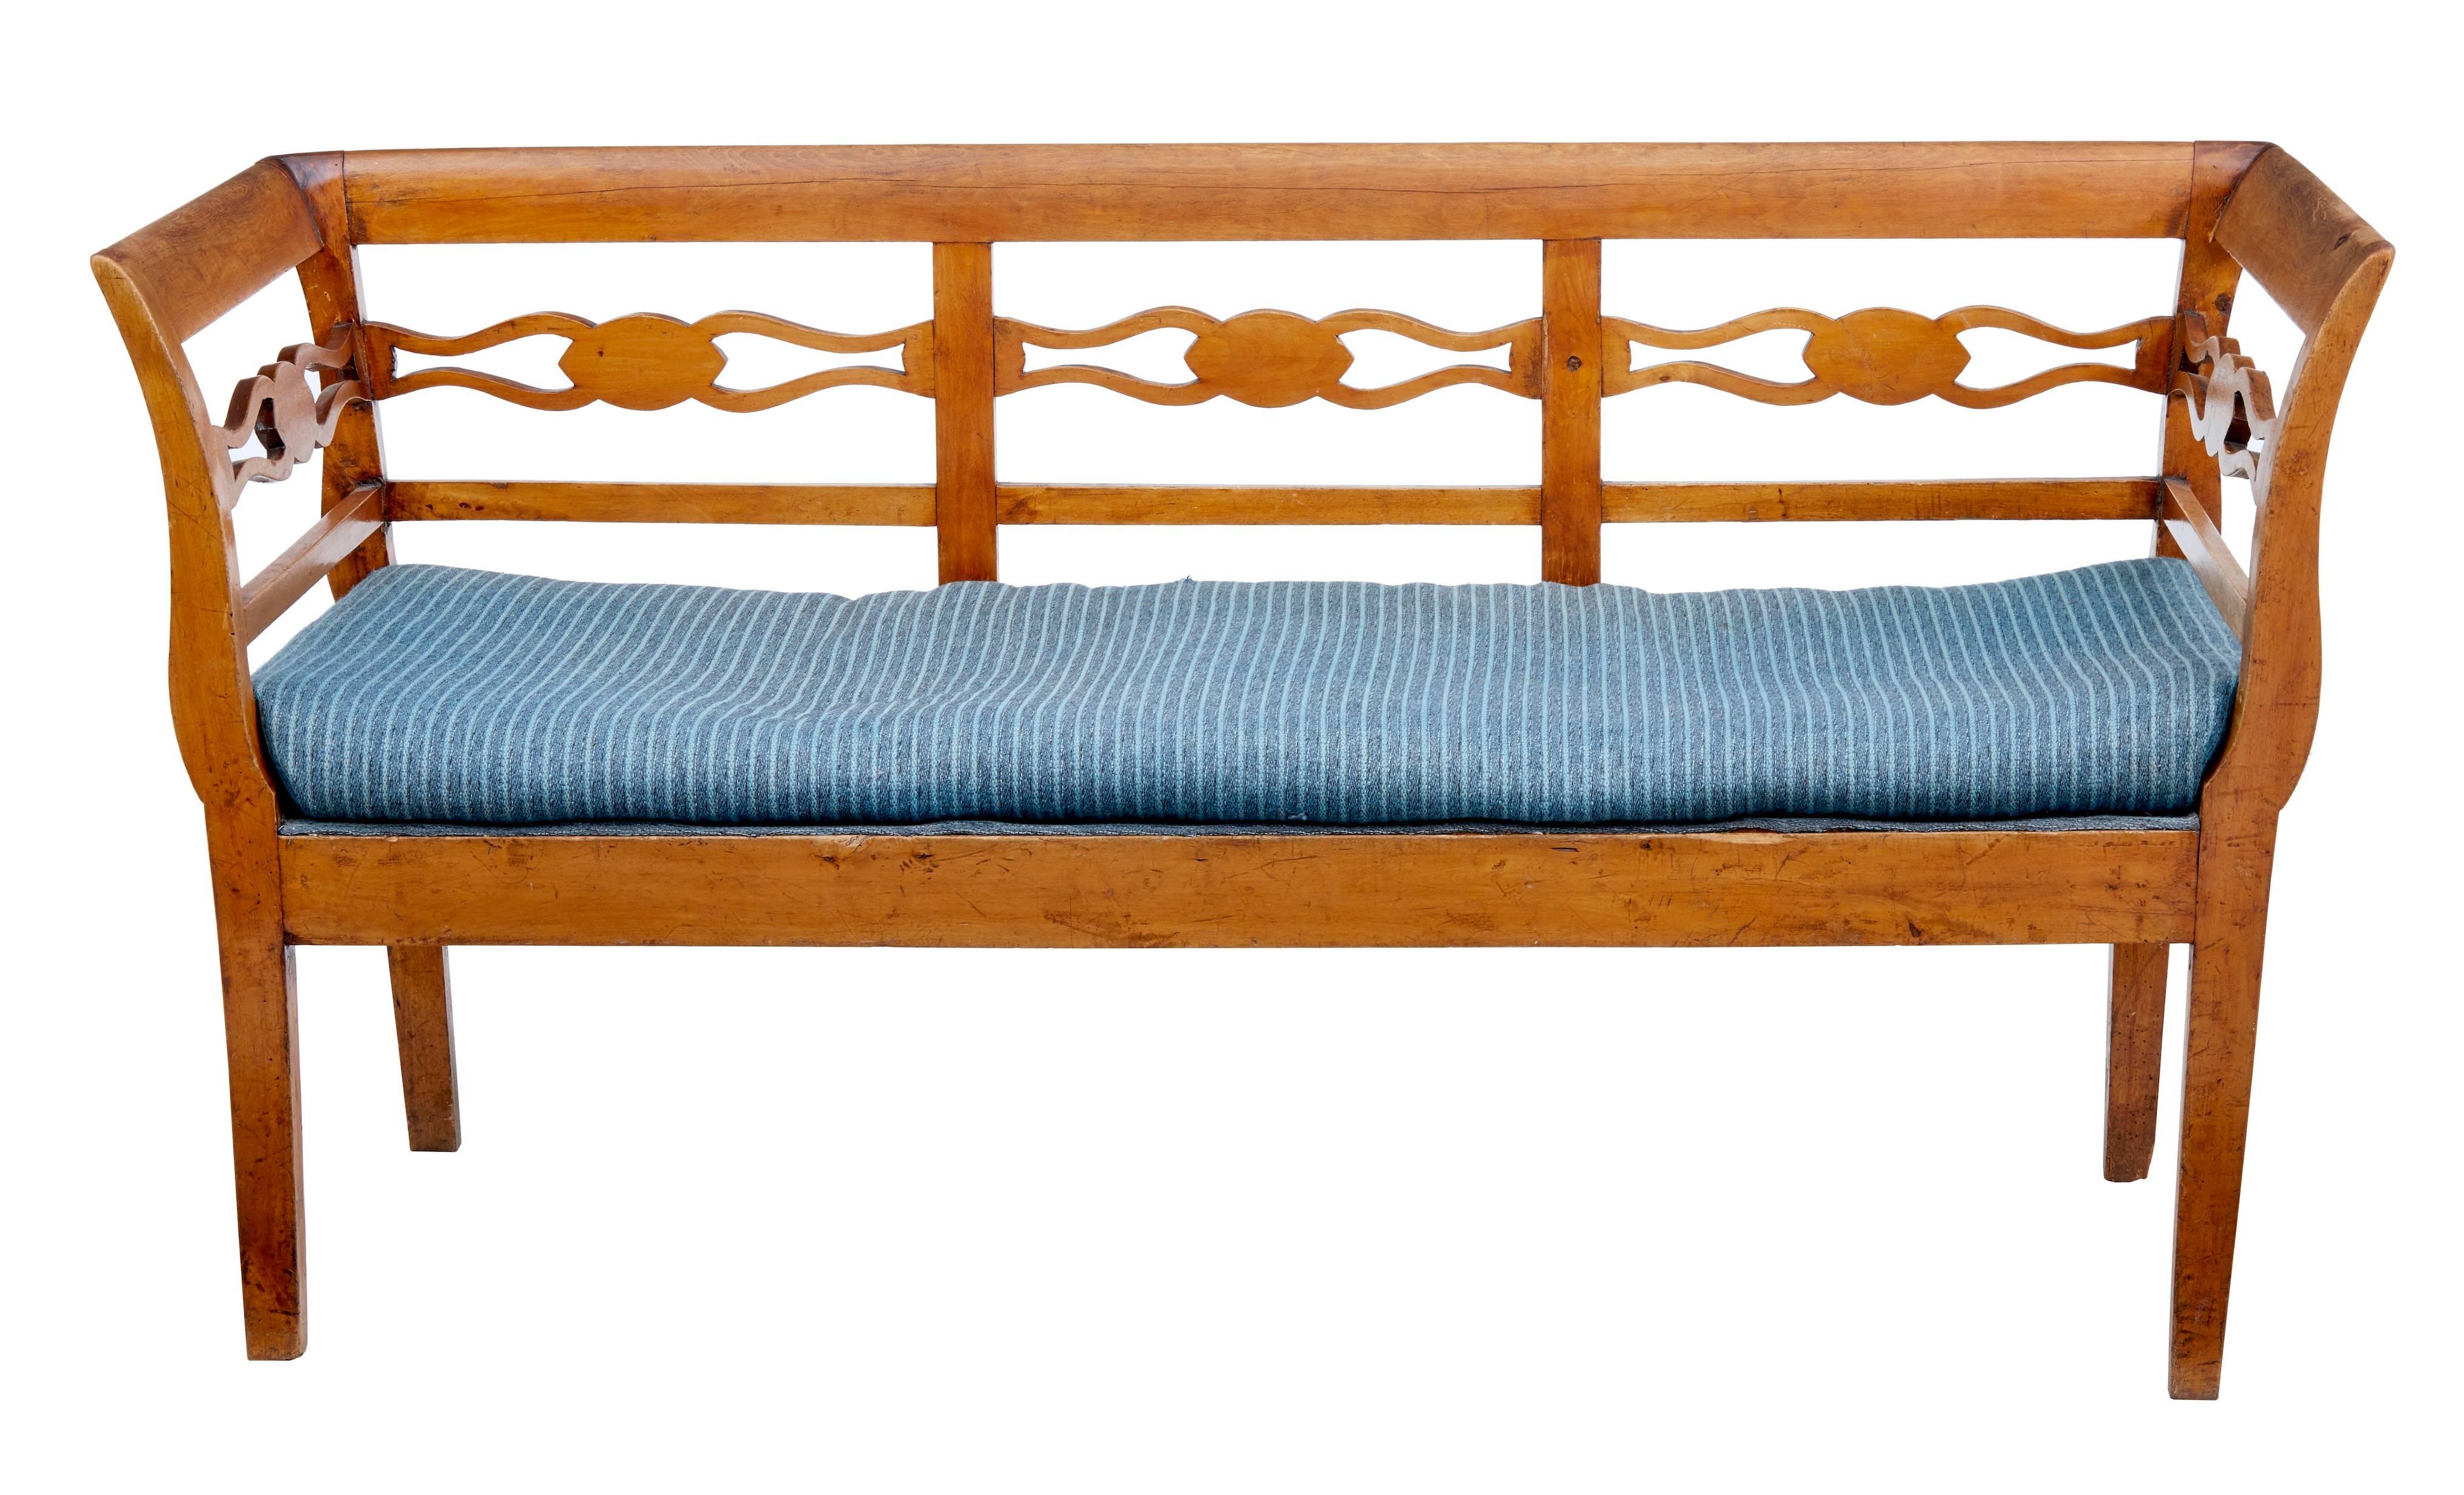 Small Swedish pine bench, circa 1870.
Open fretwork detail to the back and arms.
Original seat cushion.
Good color and patina.
Some surface marks to wood work.



Measures: Height 30 1/2